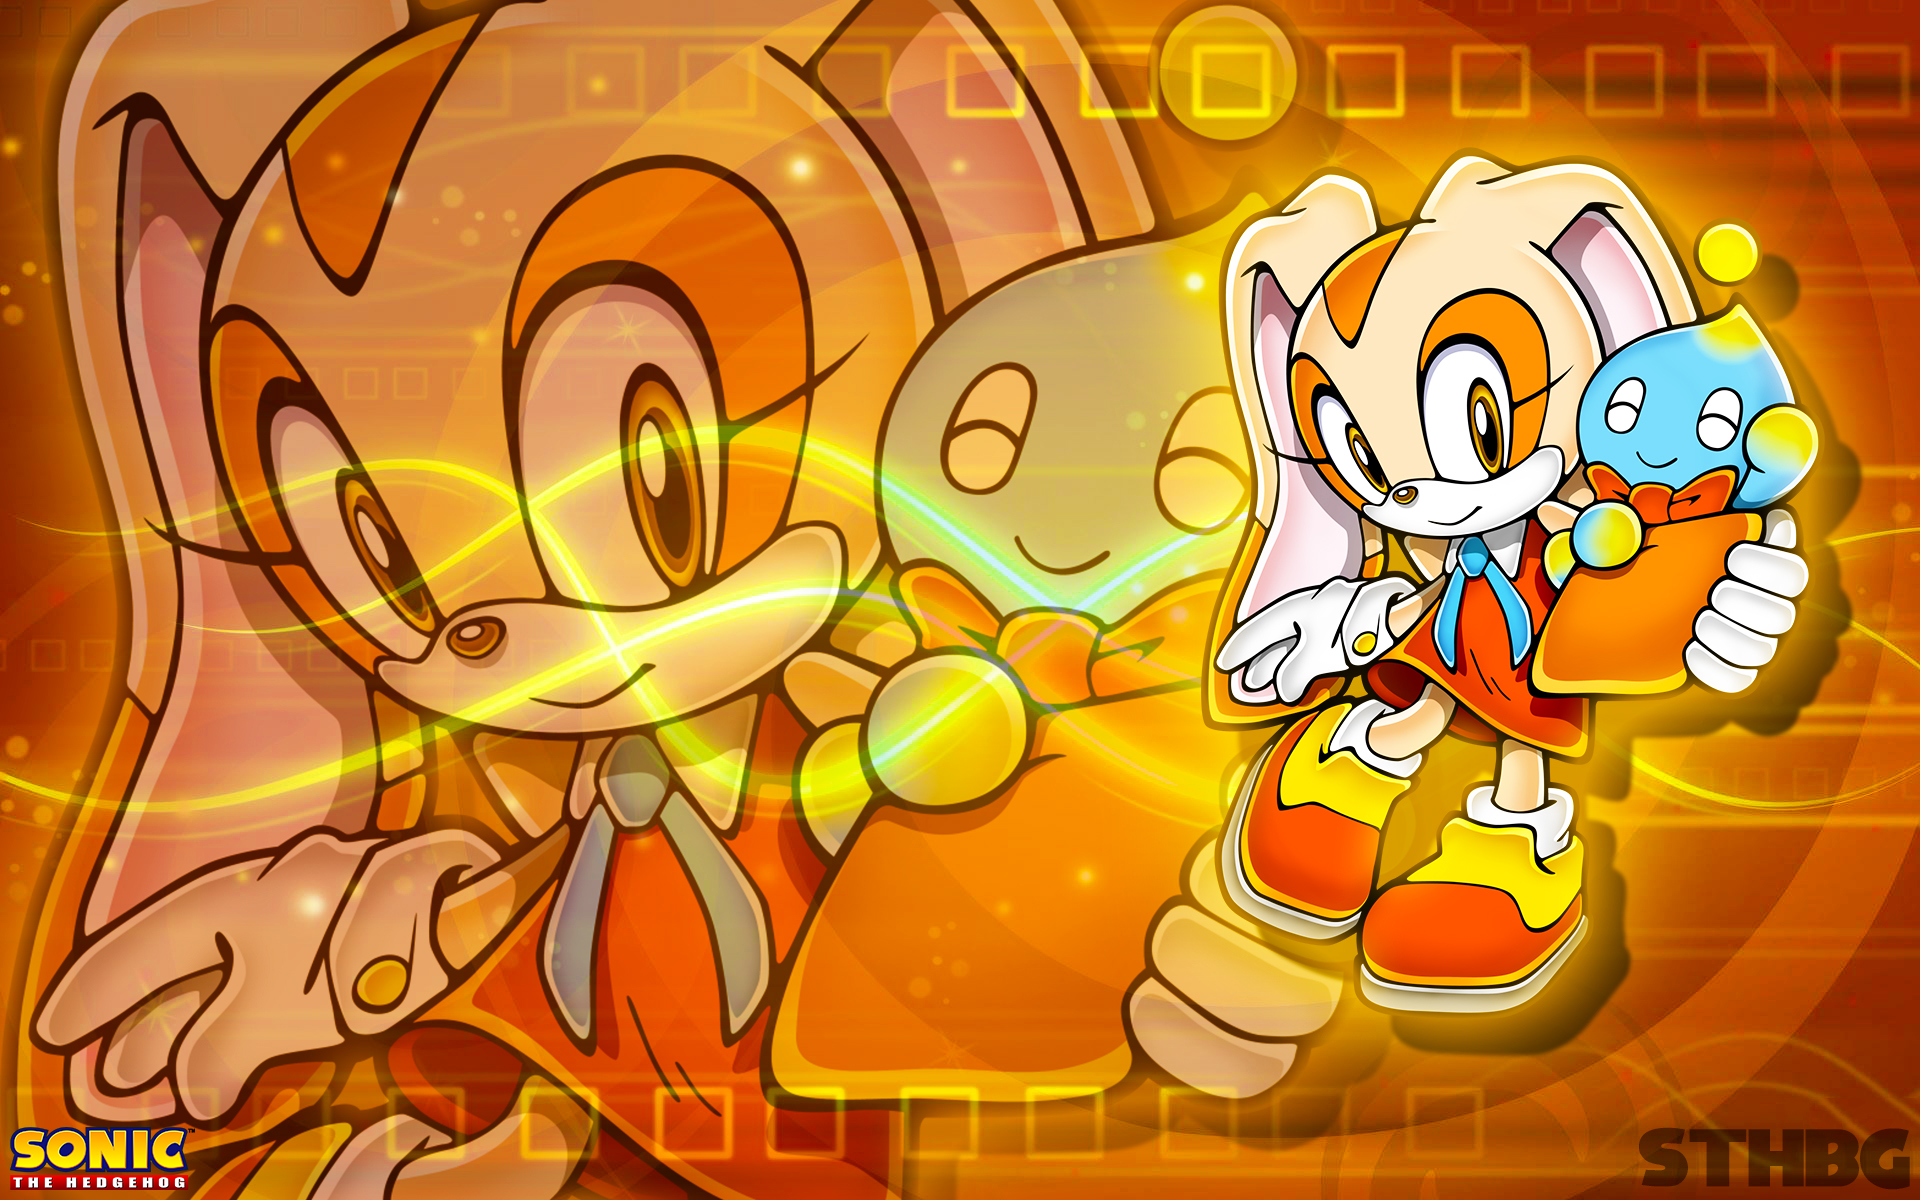 Cream The Rabbit Cheese The Chao 1920x1200